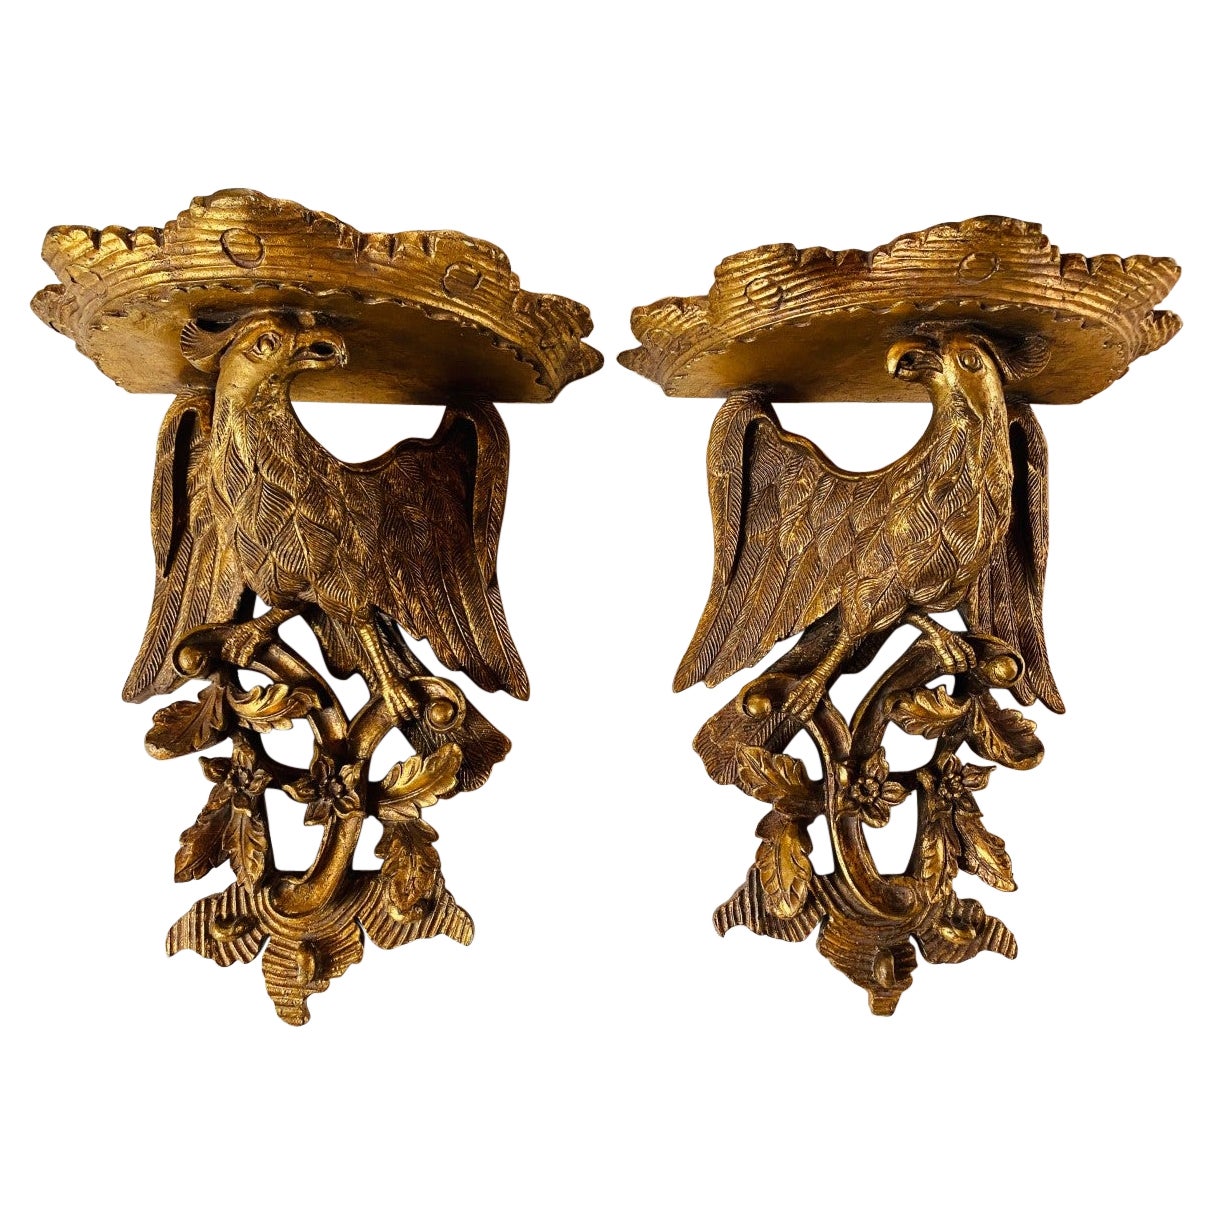 Antique Pair of Imperial Eagle Carved Wall Shelf Sconce Brackets